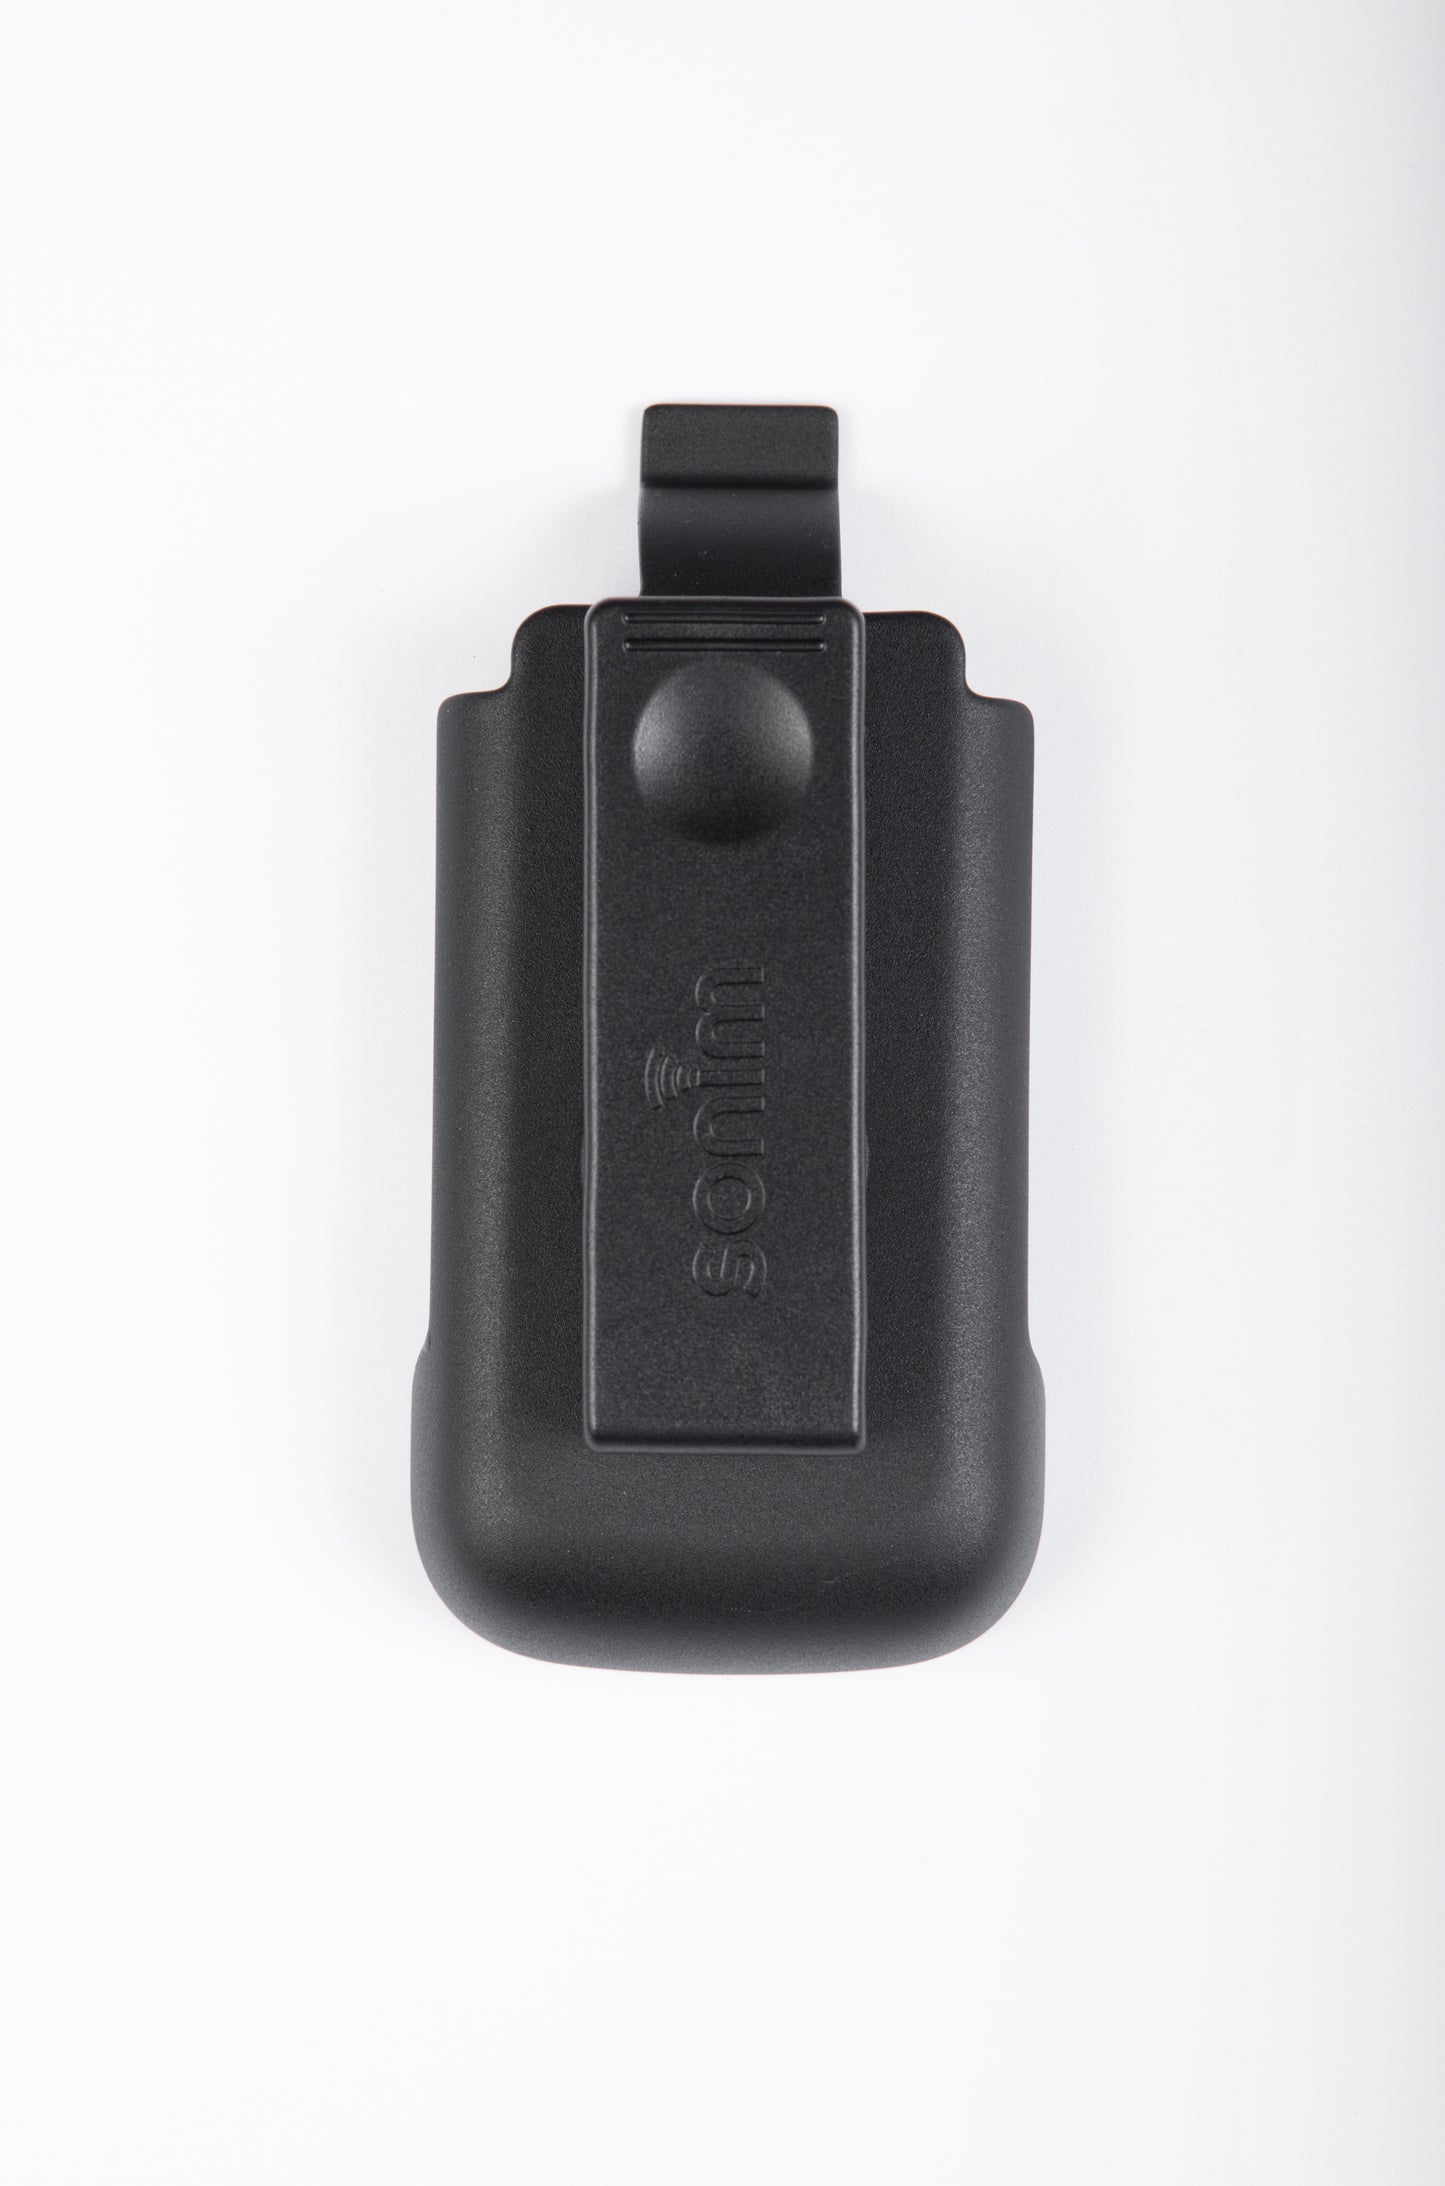 Sonim Holster with 2.25' Swivel Clip for XP3plus phone. 